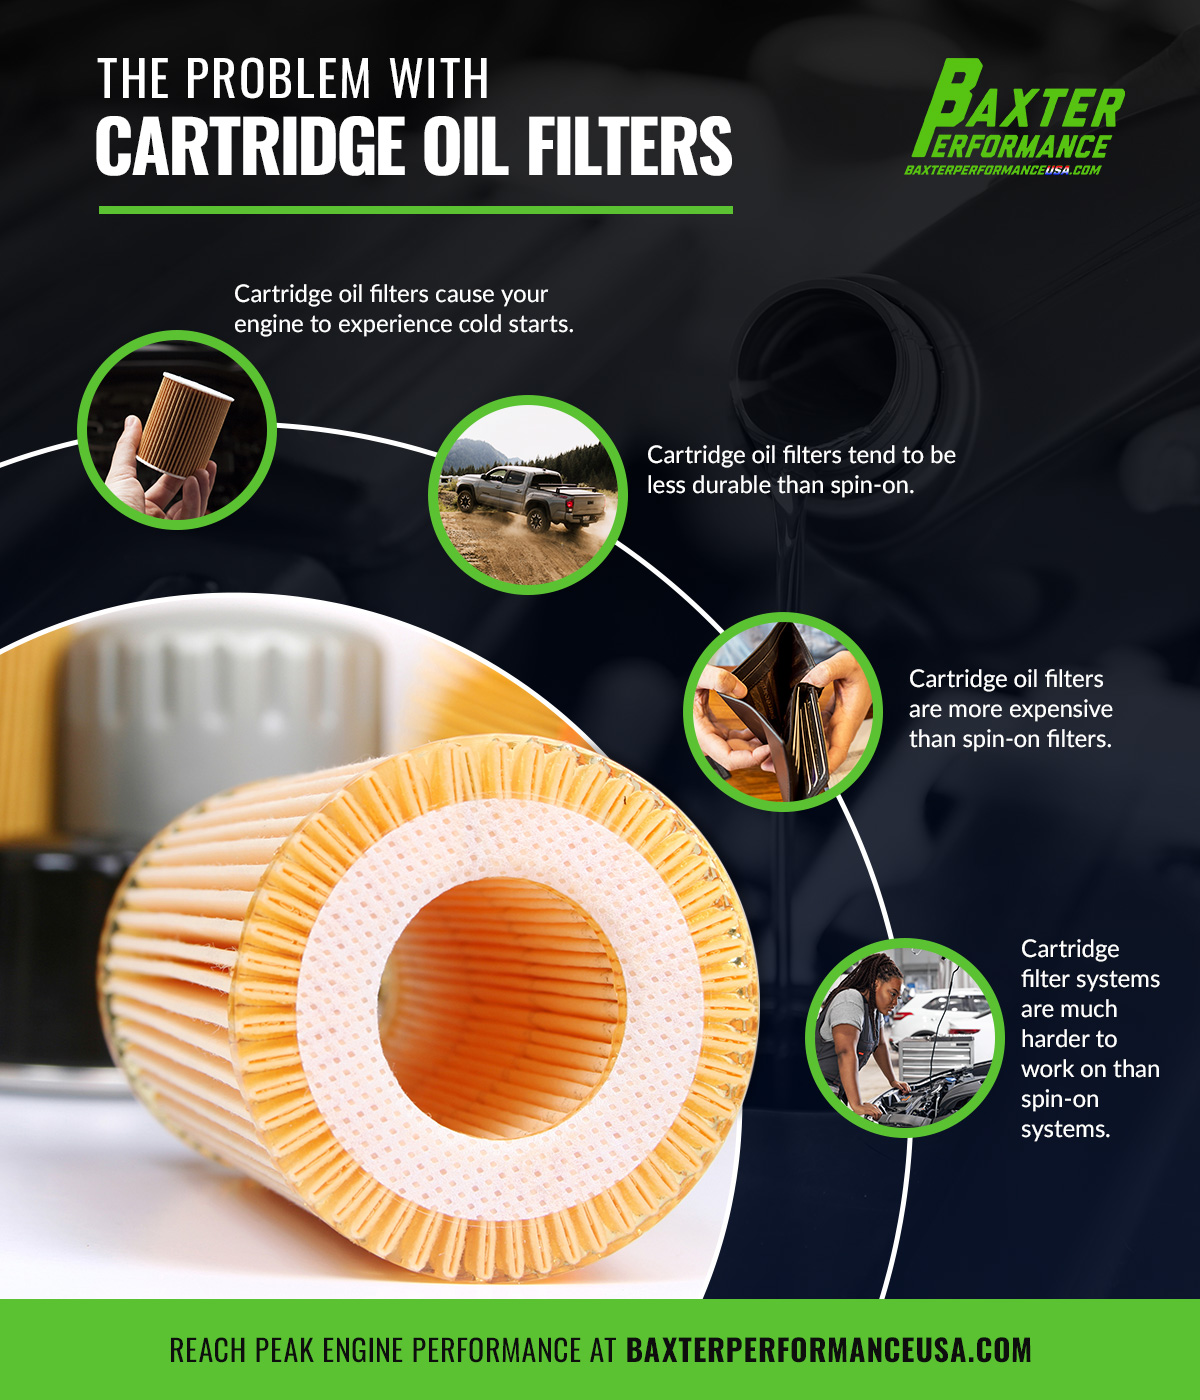 The Problem With Cartridge Oil Filters